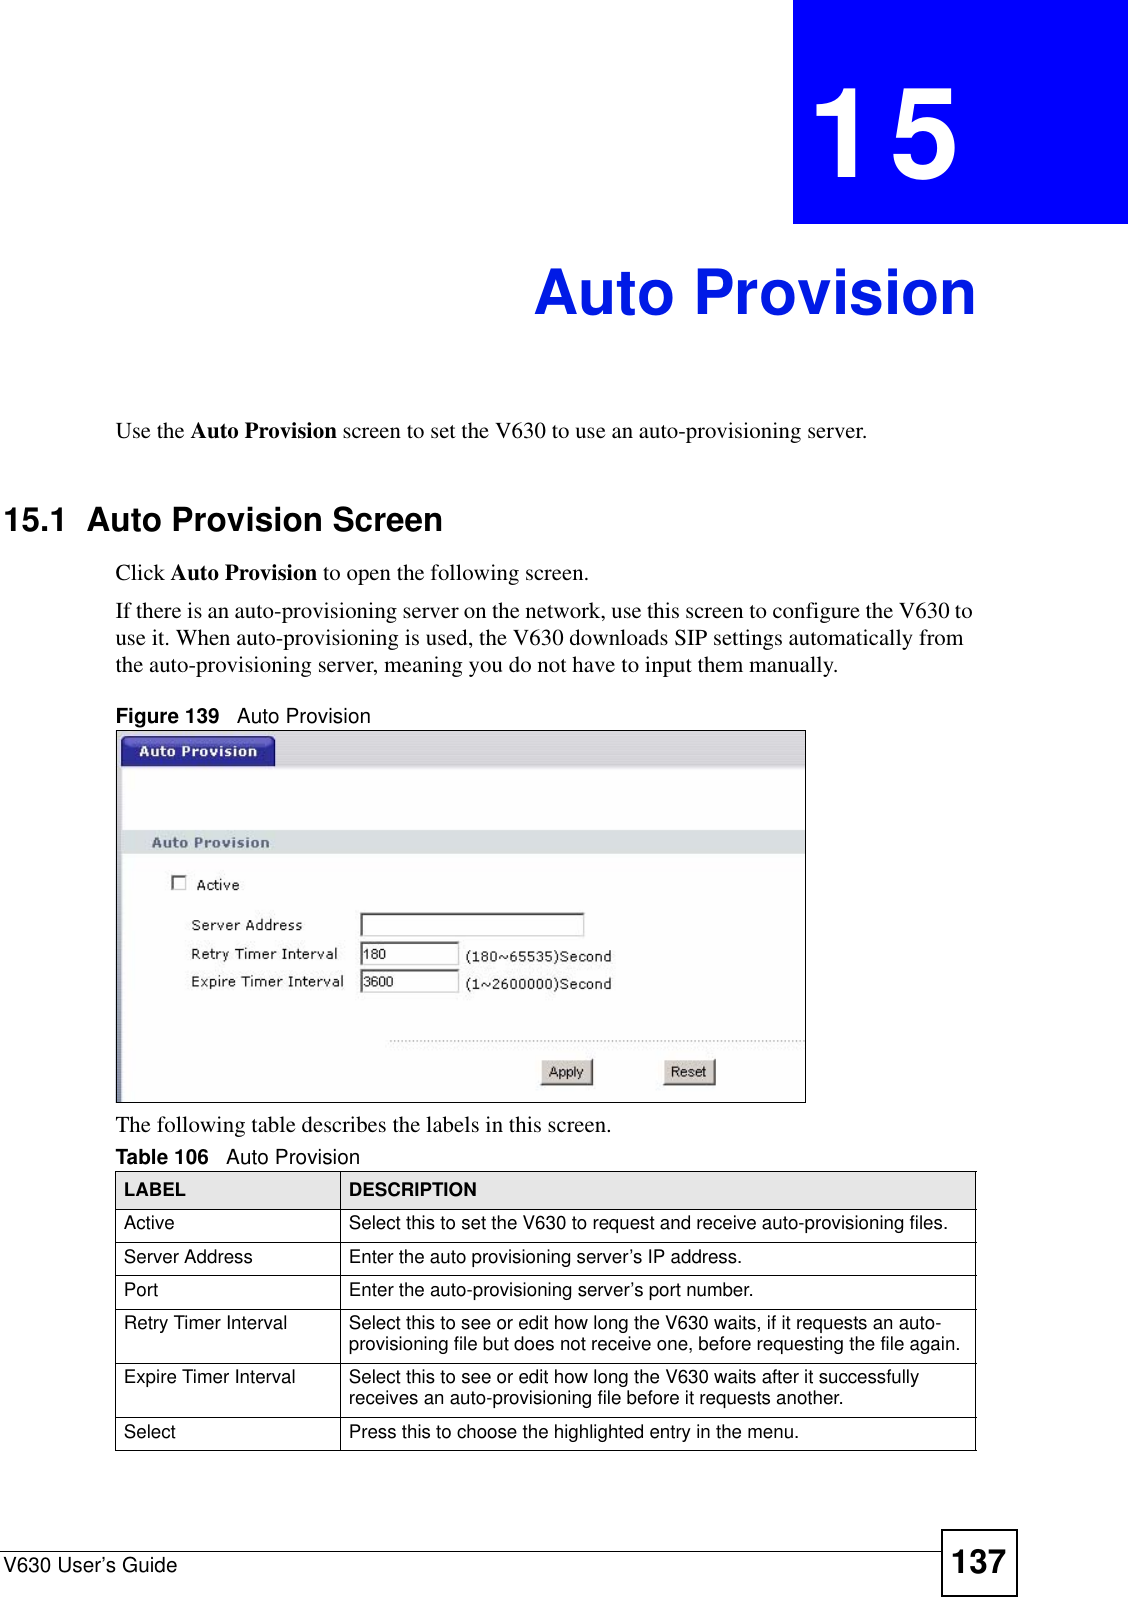 V630 User’s Guide 137CHAPTER  15 Auto ProvisionUse the Auto Provision screen to set the V630 to use an auto-provisioning server.15.1  Auto Provision ScreenClick Auto Provision to open the following screen.If there is an auto-provisioning server on the network, use this screen to configure the V630 to use it. When auto-provisioning is used, the V630 downloads SIP settings automatically from the auto-provisioning server, meaning you do not have to input them manually.Figure 139   Auto ProvisionThe following table describes the labels in this screen.Table 106   Auto ProvisionLABEL DESCRIPTIONActive Select this to set the V630 to request and receive auto-provisioning files.Server Address Enter the auto provisioning server’s IP address. Port Enter the auto-provisioning server’s port number.Retry Timer Interval Select this to see or edit how long the V630 waits, if it requests an auto-provisioning file but does not receive one, before requesting the file again.Expire Timer Interval Select this to see or edit how long the V630 waits after it successfully receives an auto-provisioning file before it requests another.Select  Press this to choose the highlighted entry in the menu.